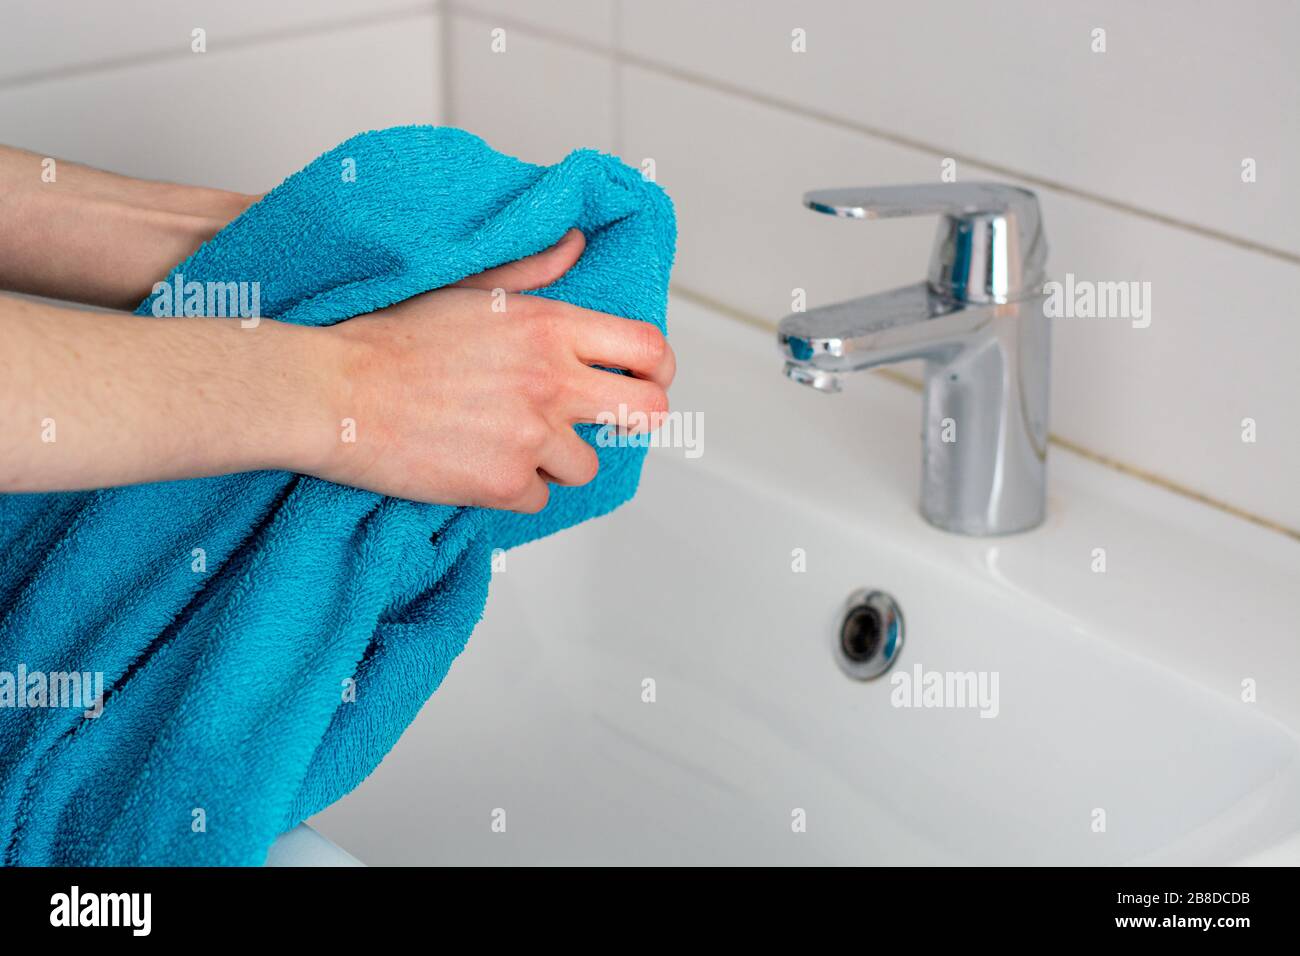 Person Using Towel Wiping Hands Dry Washing Bathroom Home Hygiene Stock  Photo by ©goffkein 330686390